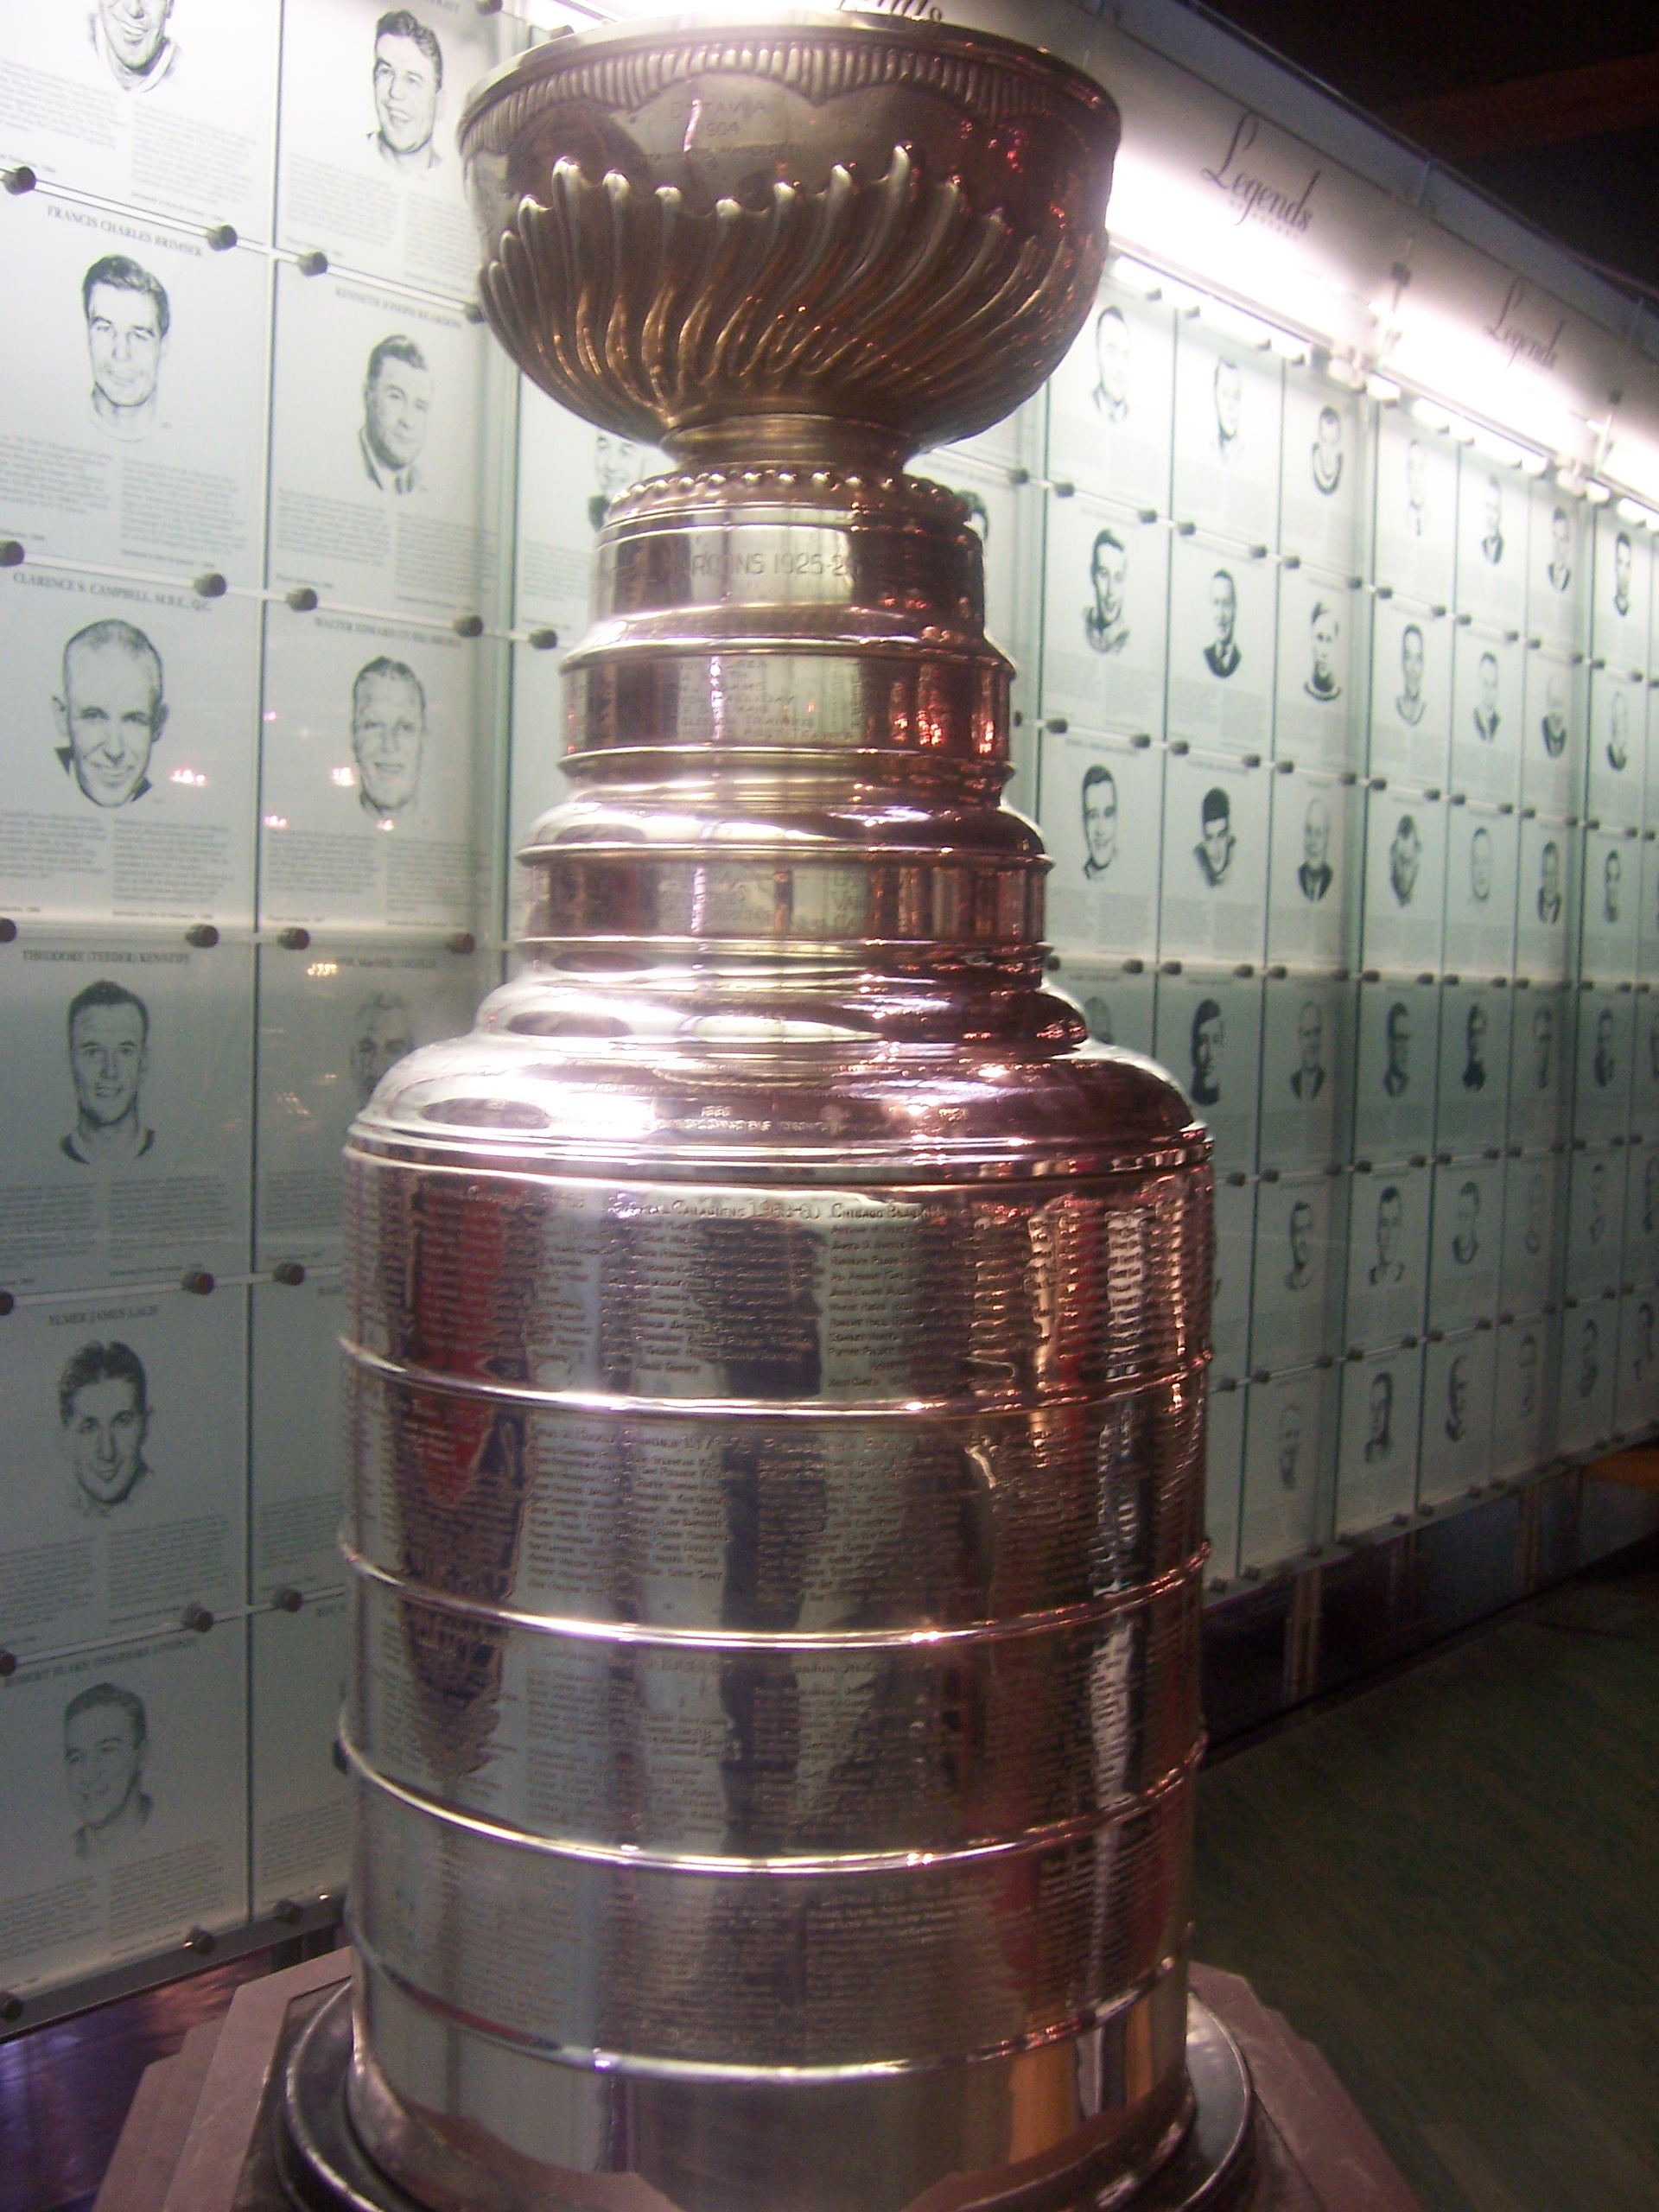 https://static.wikia.nocookie.net/icehockey/images/c/c8/Stanley_cup_closeup.jpg/revision/latest?cb=20080314172857